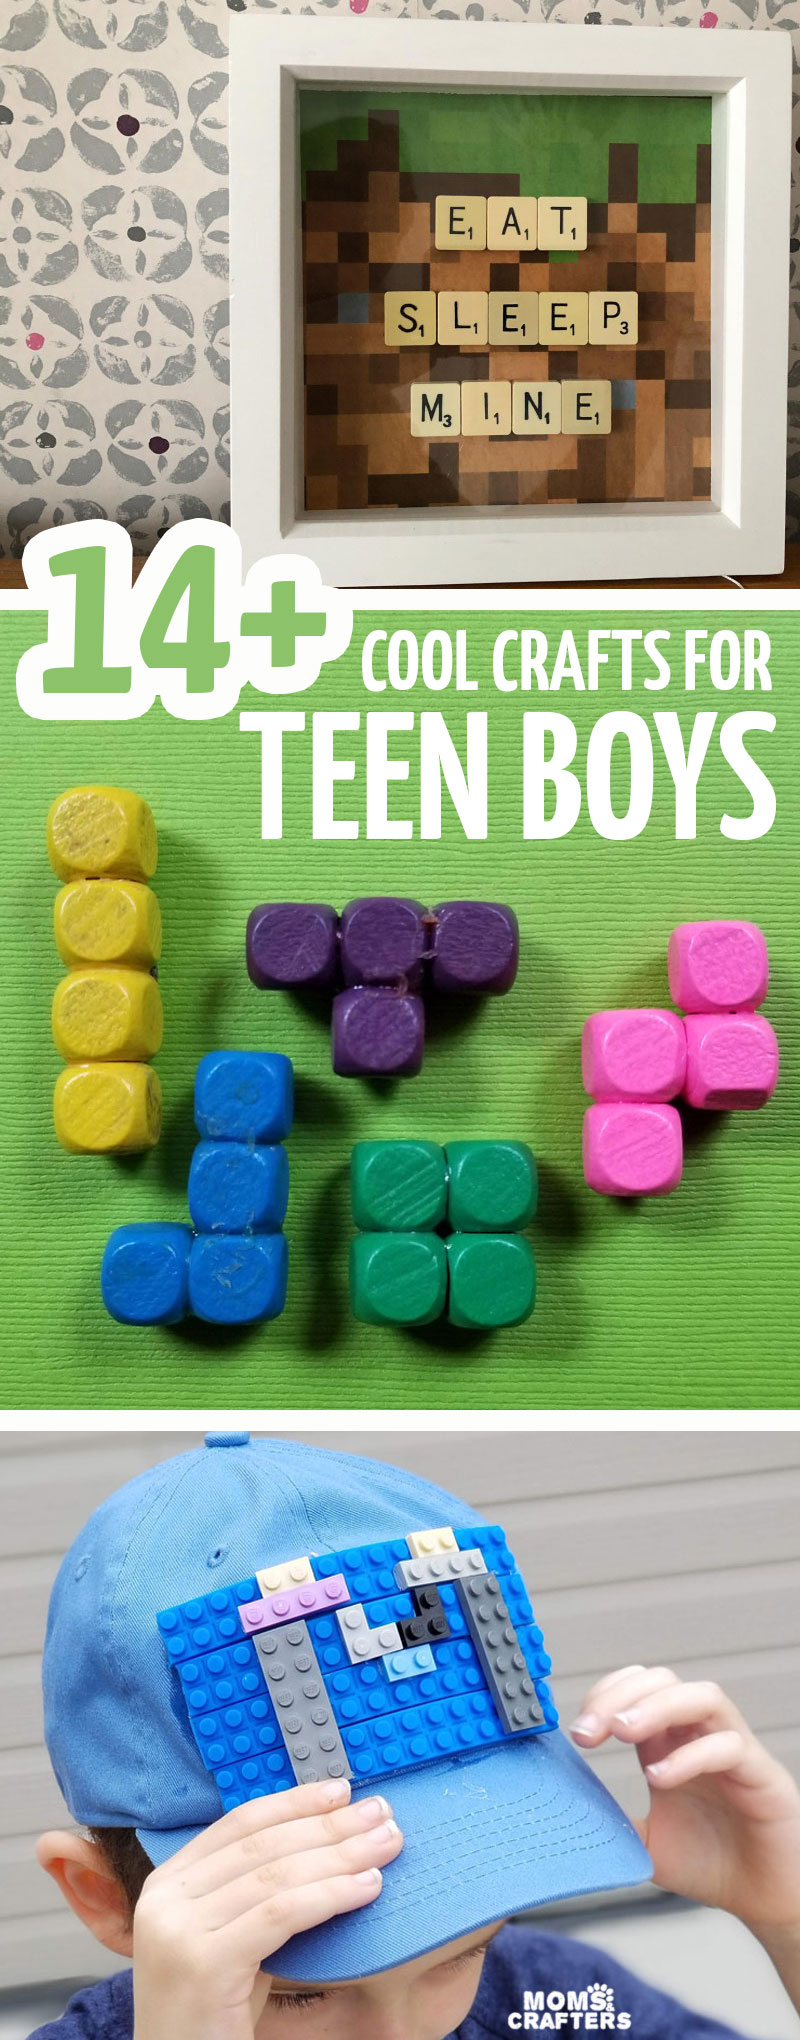 50+ Unplugged Activities for Tween Age Boys - Frugal Fun For Boys